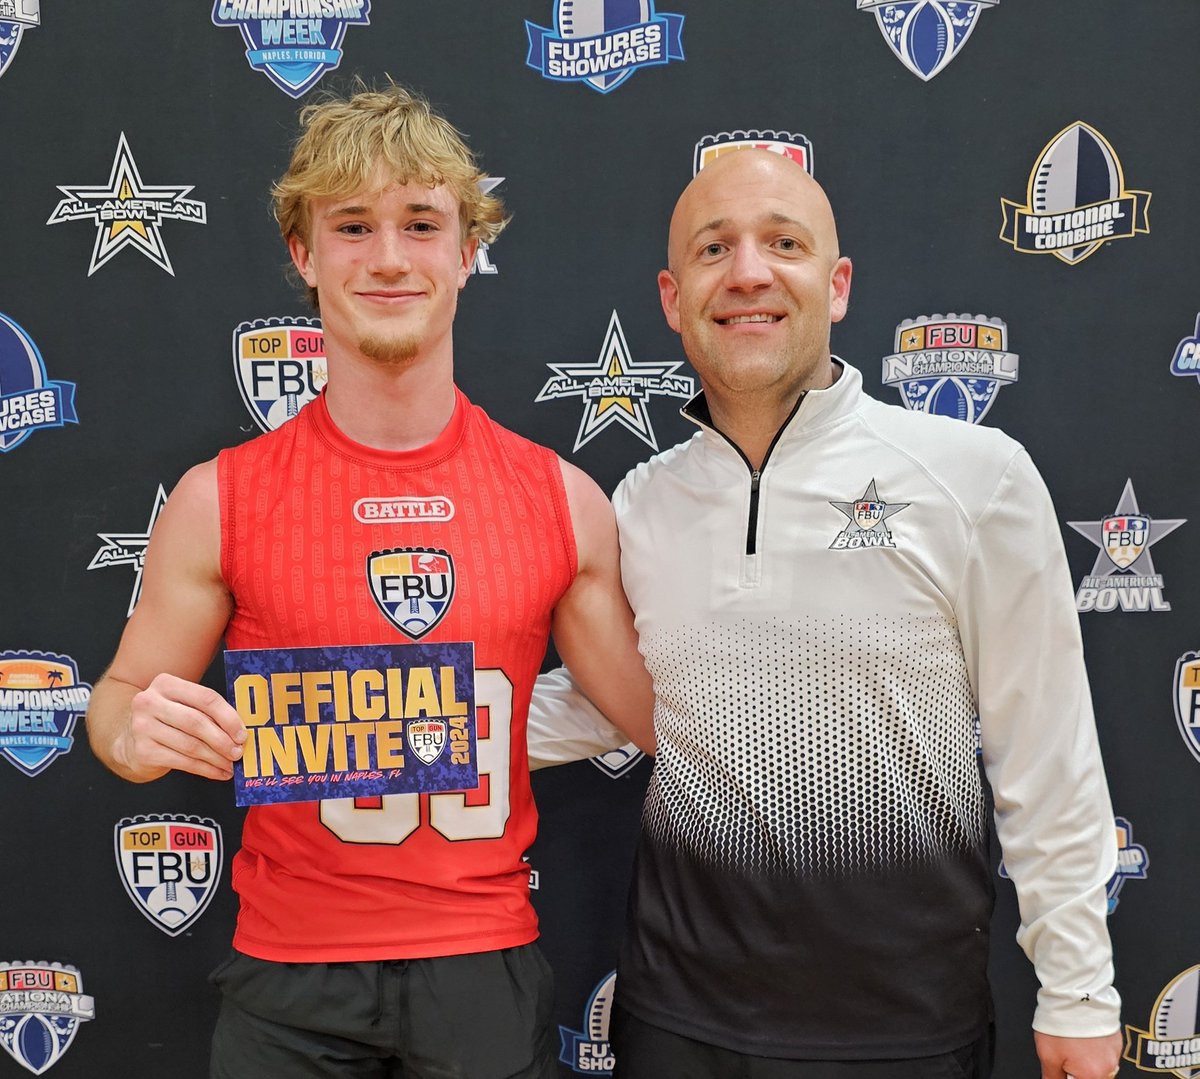 Very grateful for the @FBUcamp All-Camp and MVP runner-up recognition and the invite to my 2nd Top Gun event in Naples, FL. Special thank you to coach @longfellowstate for the guidance! @LauerFBU @AWilliamsUSA @CoachLewis46 @Ponies_Football @OJW_Scouting @AllenTrieu @TNTACADEMY1